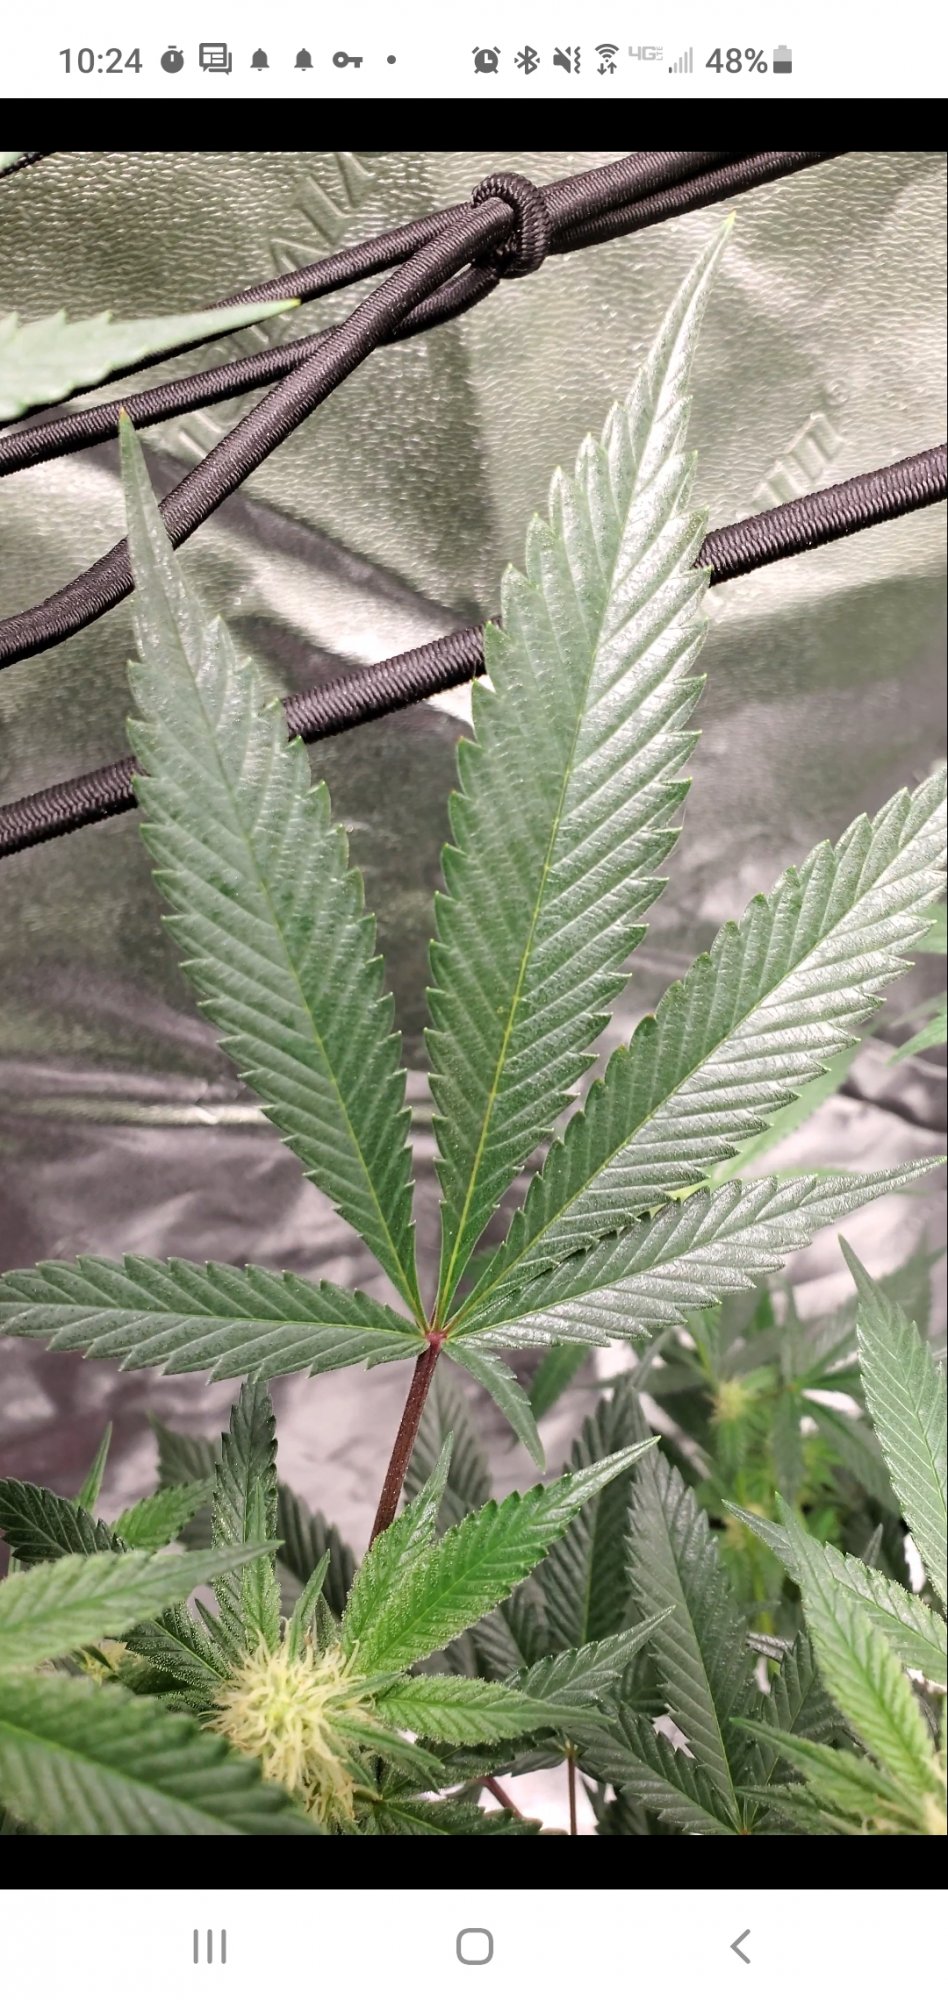 Thrips to black spots to leaf tips curling up in week 4 flower 8